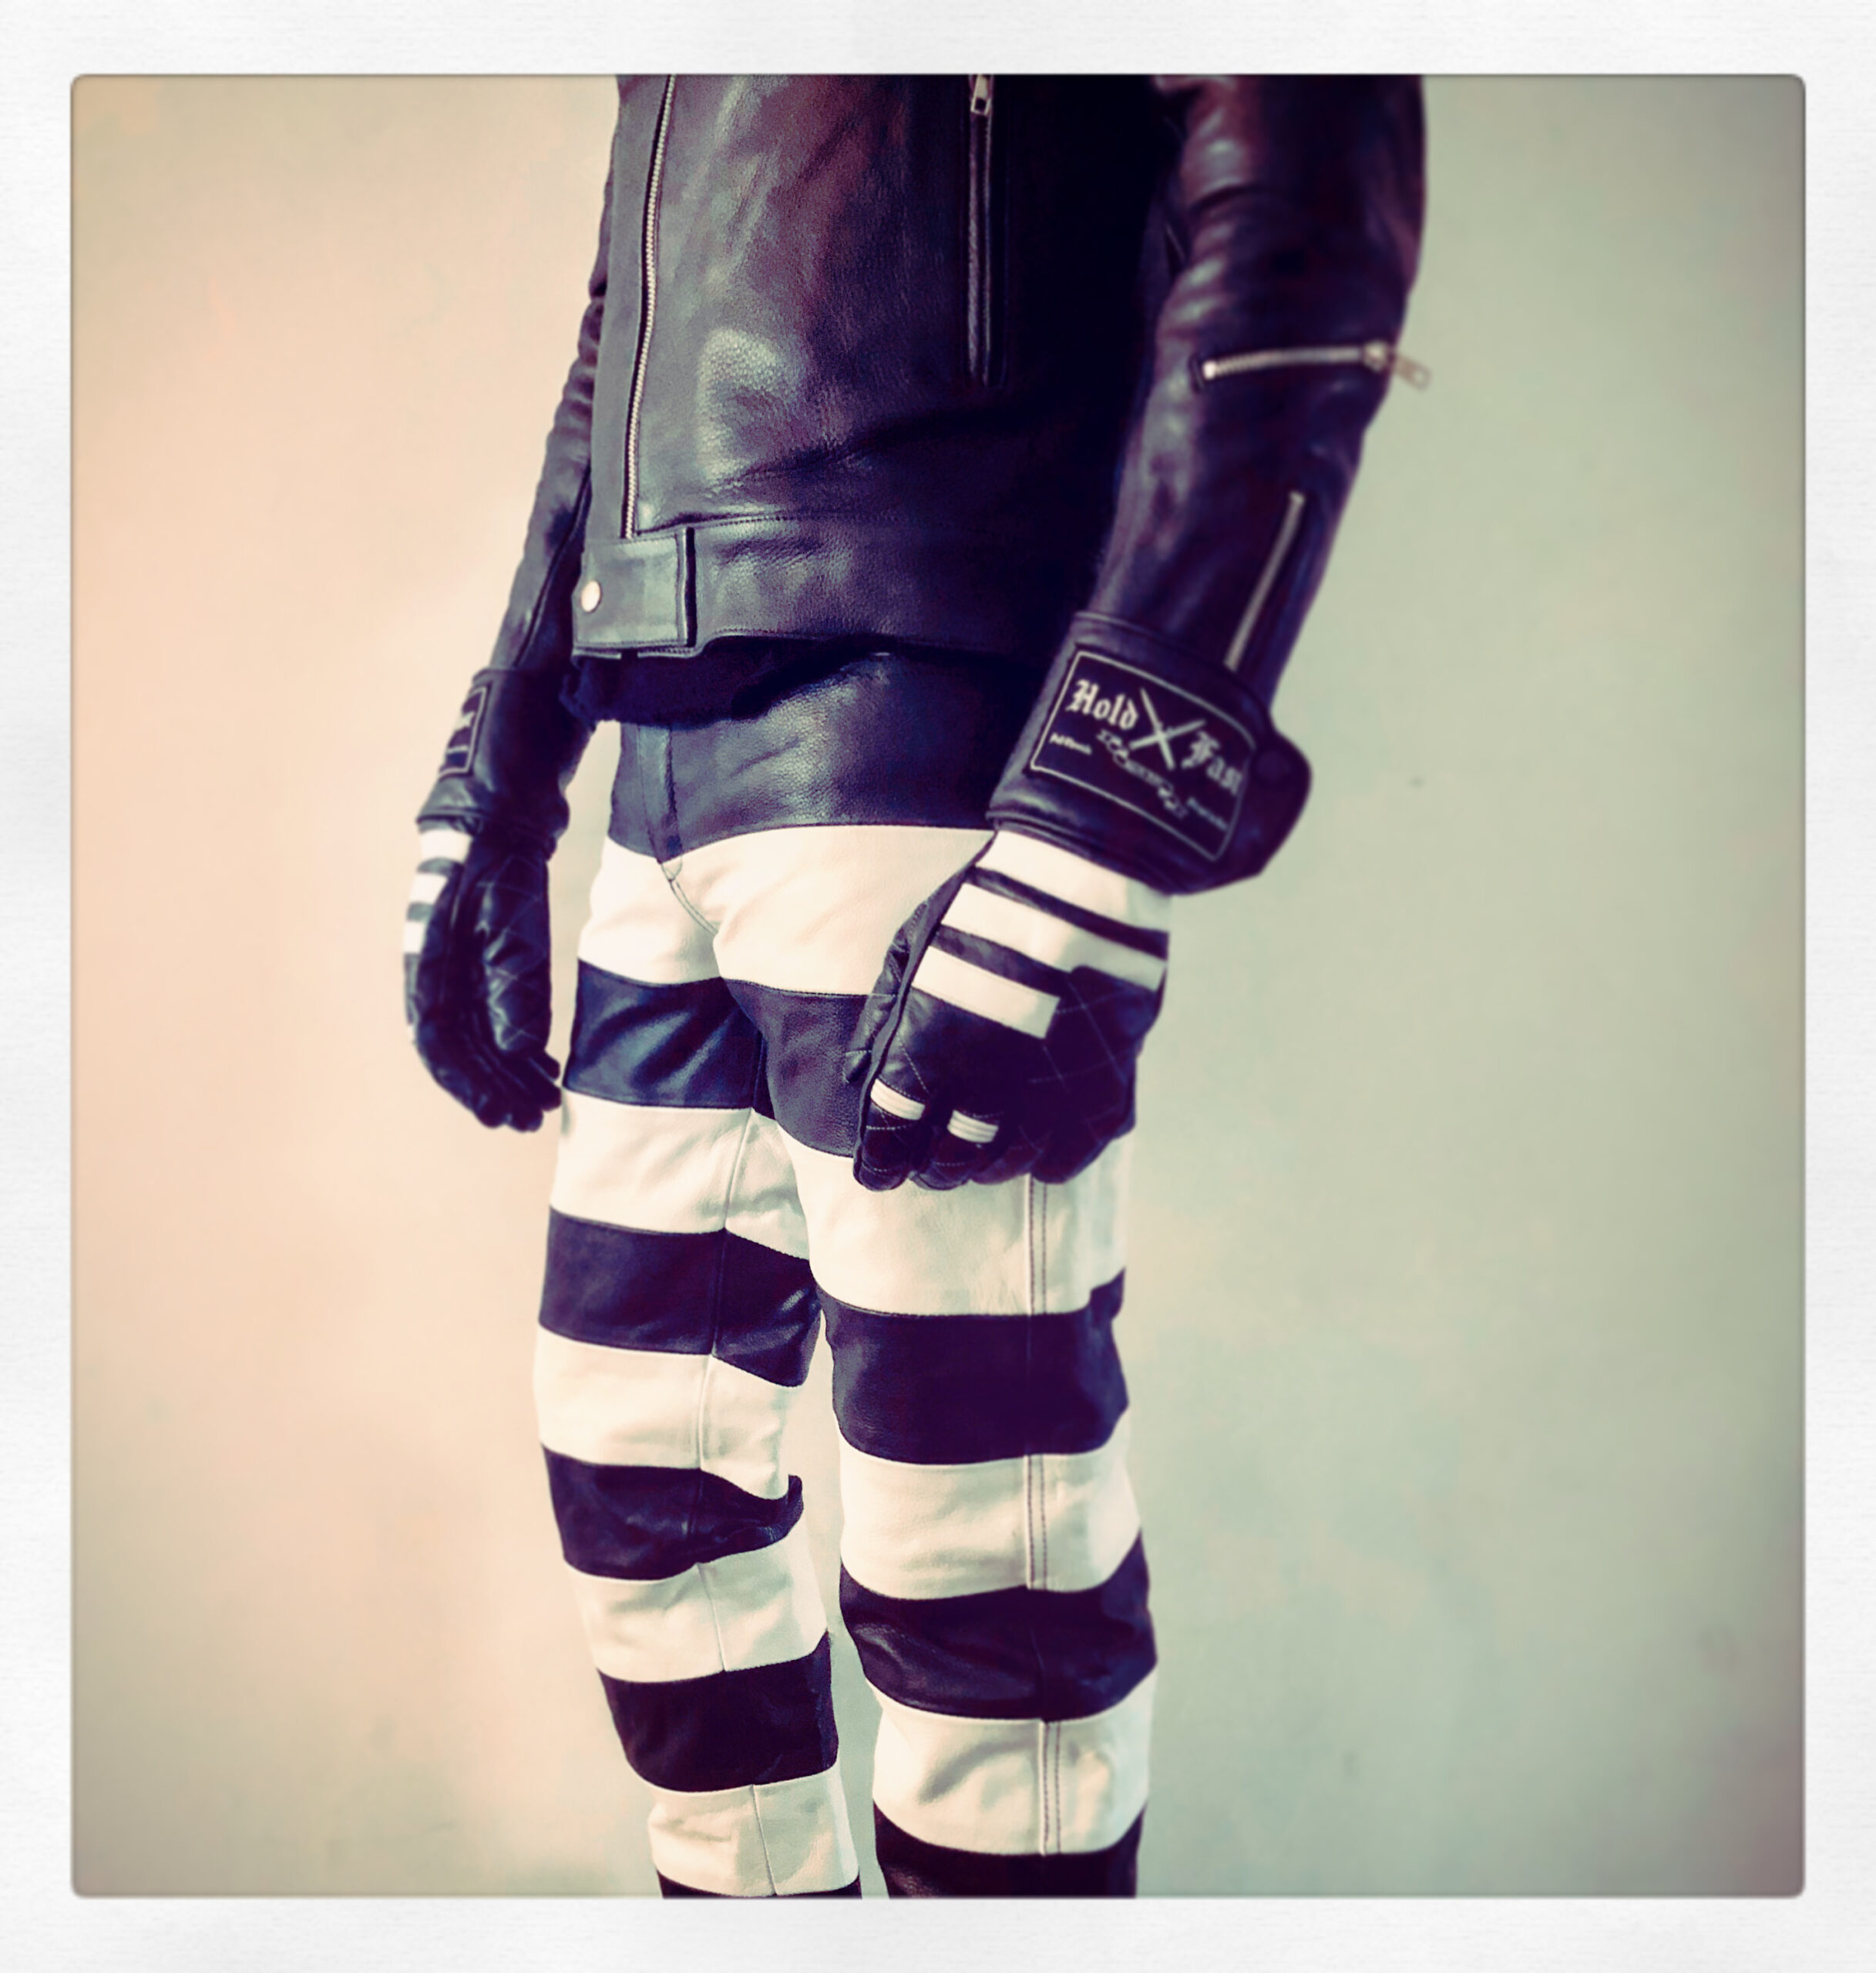 Gorgeous Black Leather Biker Pants for Women. Black Leather Pants With  Light Protection. 